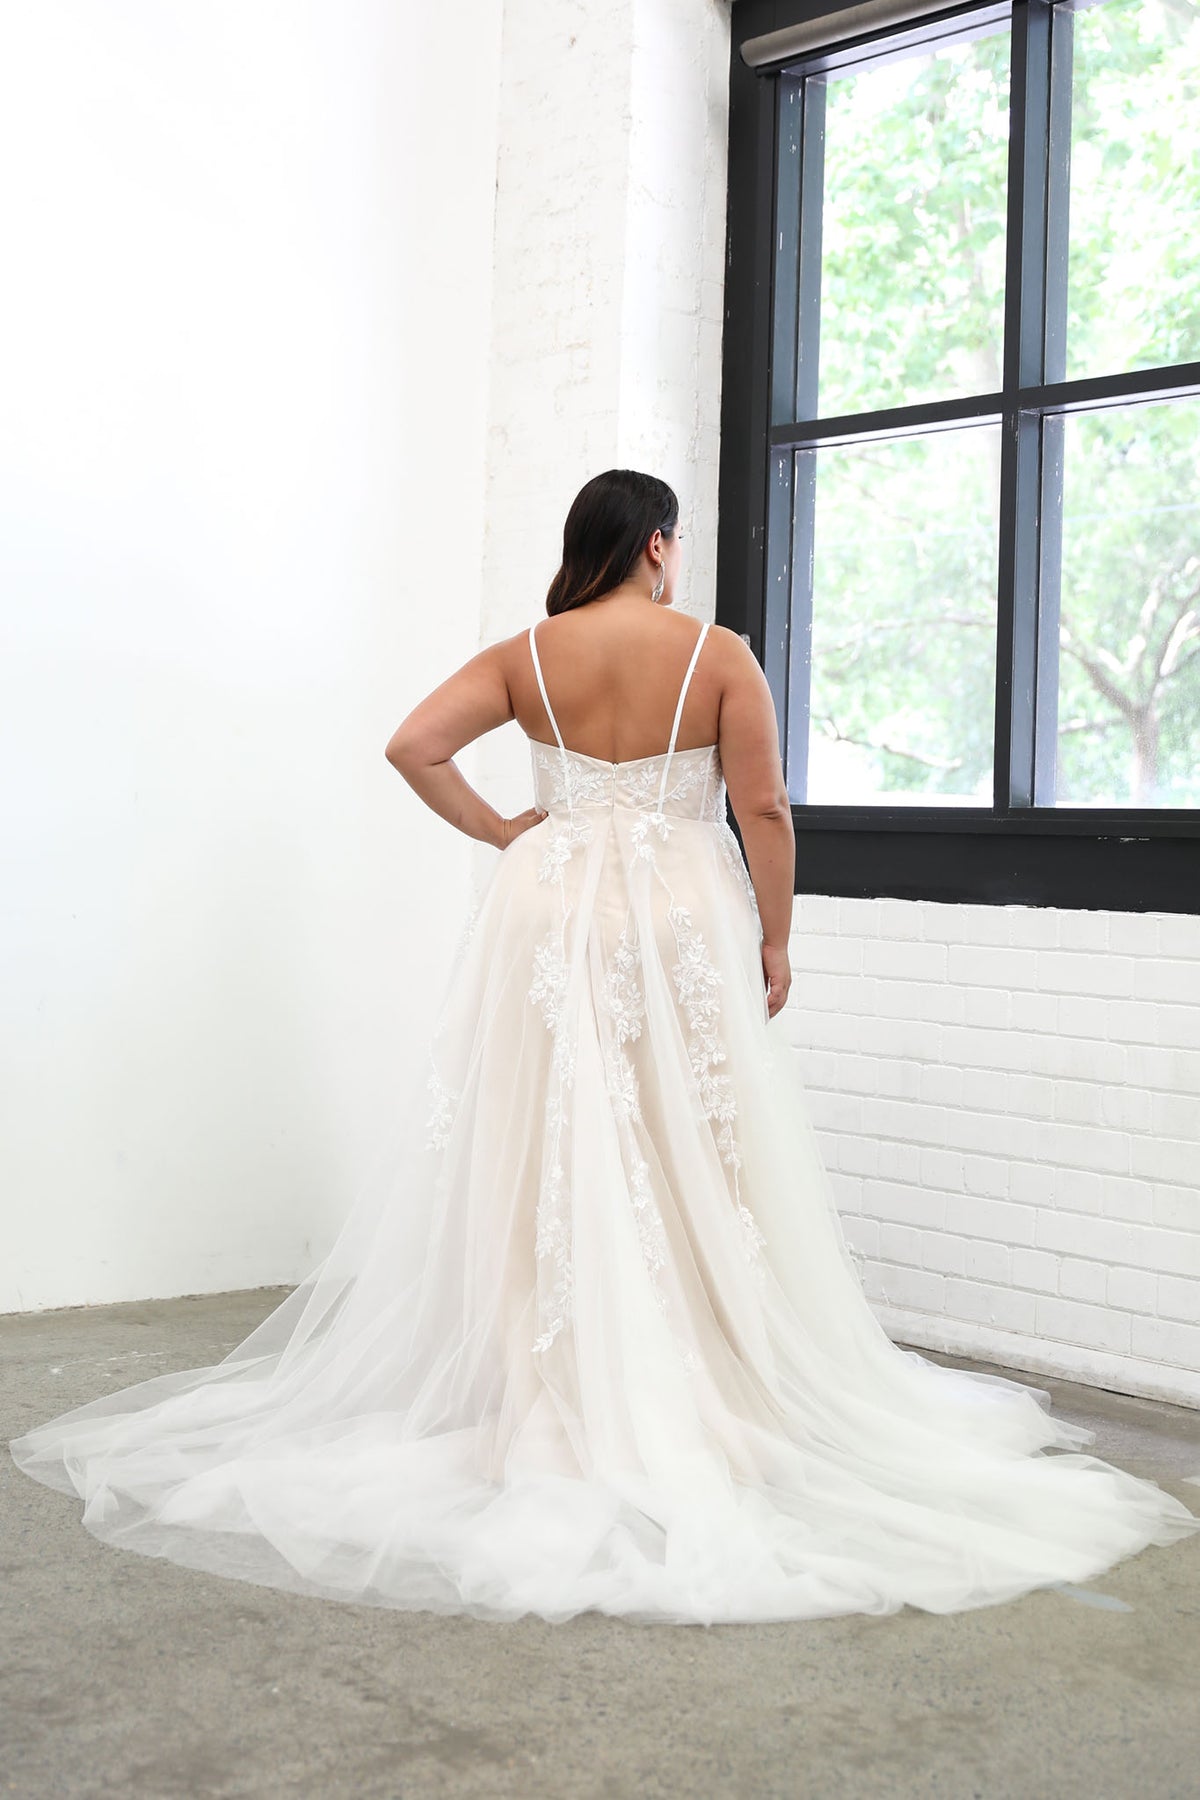 Back Image of Plus Size Bride wearing Ivory Off White Lace A-line Wedding Gown with Floral and Vine-like Lace Motifs Embellished on Layered Tulle, Trendy Exposed Bone Bodice, Voluminous Full A-line Skirt and Flowing Sweep Train